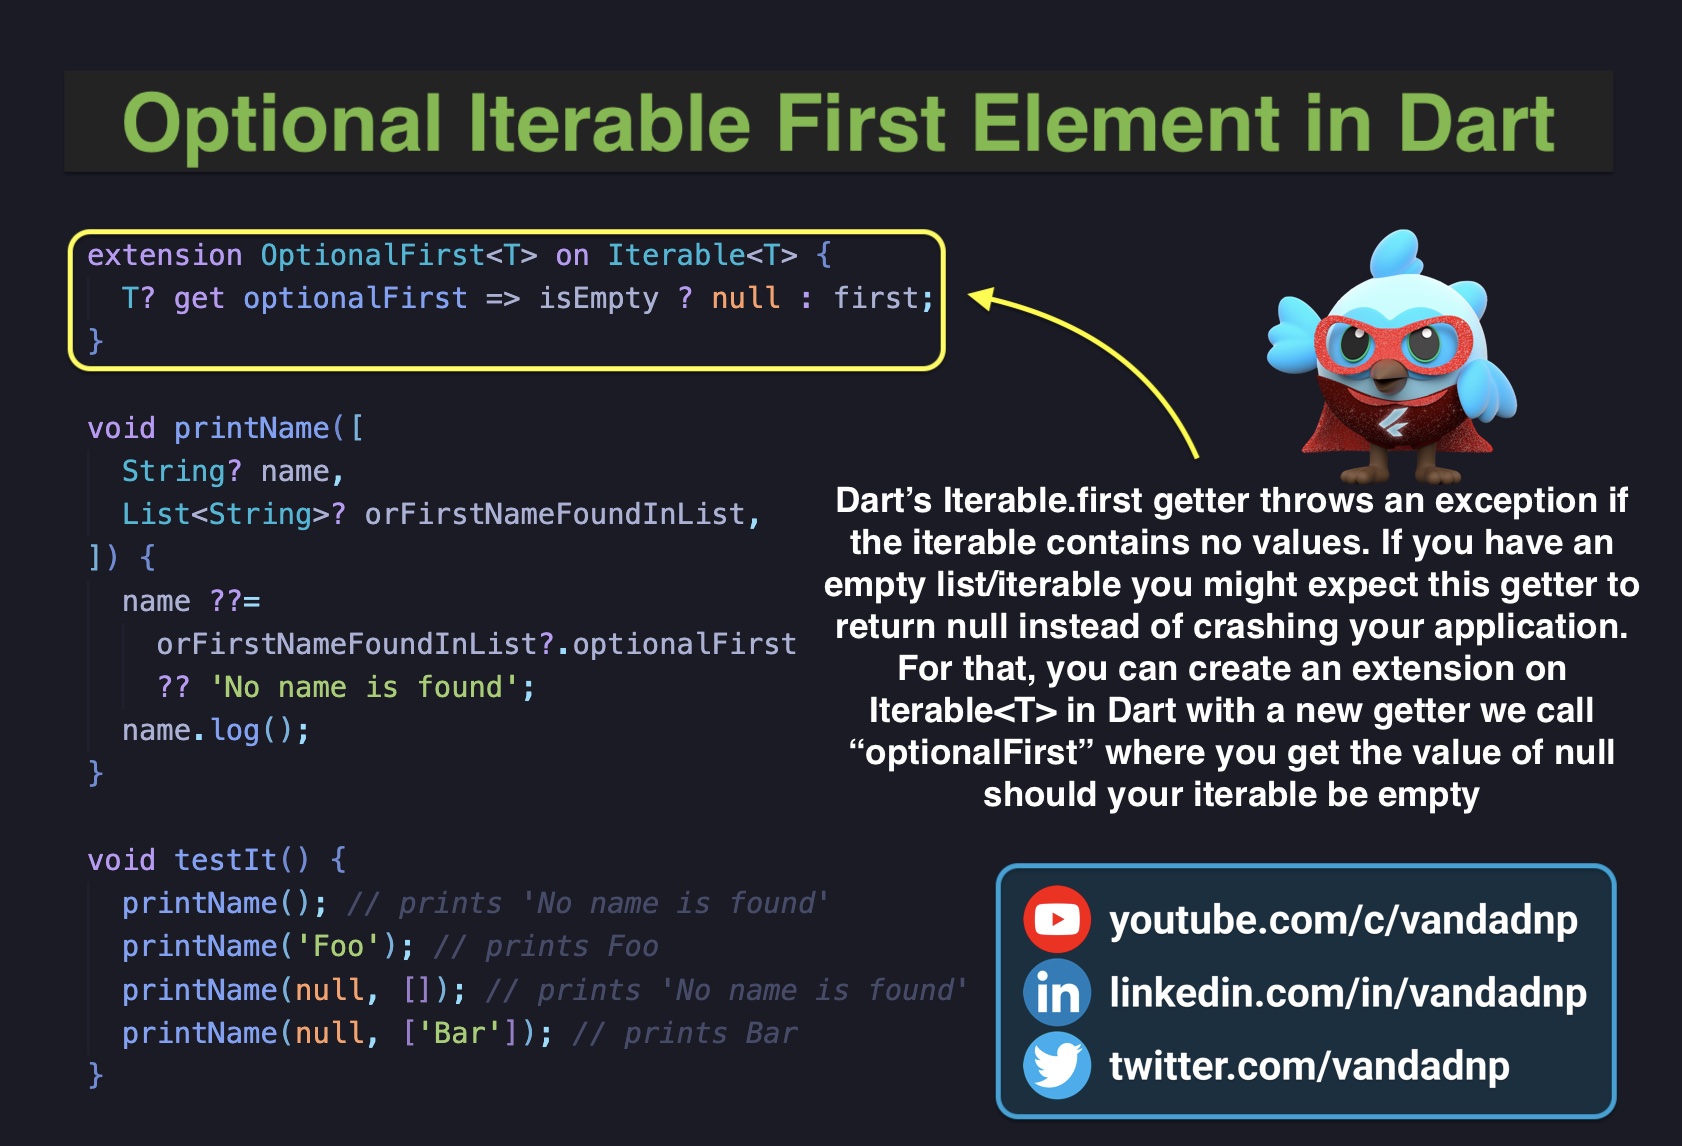 optional-iterable-first-element-in-dart.jpg